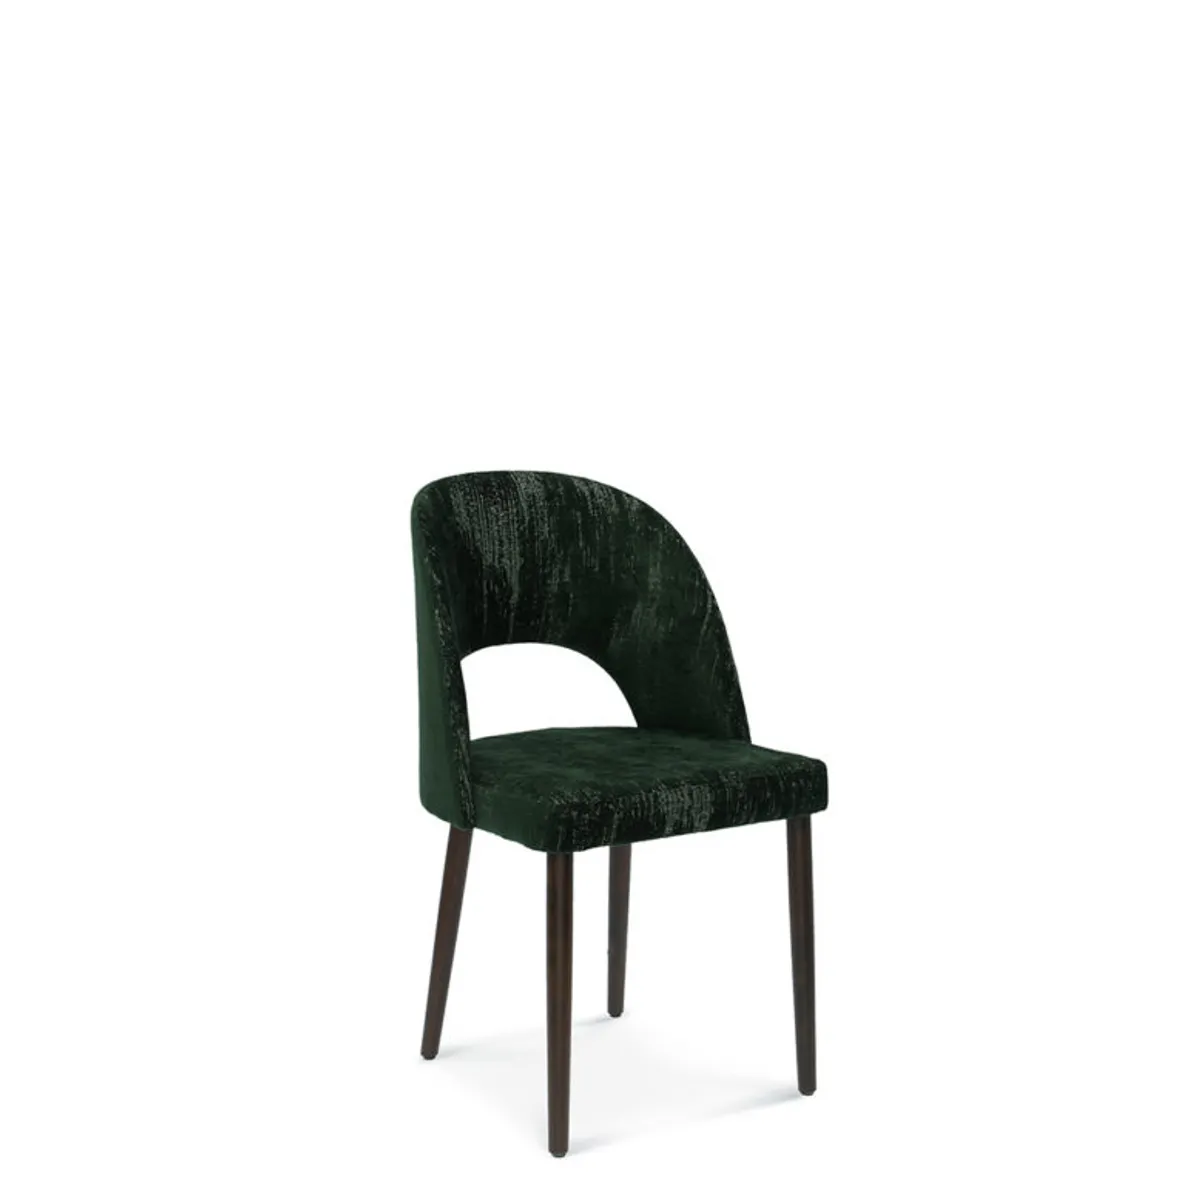 Curve Soft Side Chair A 1412 4 Bar Stool Inside Out Contracts